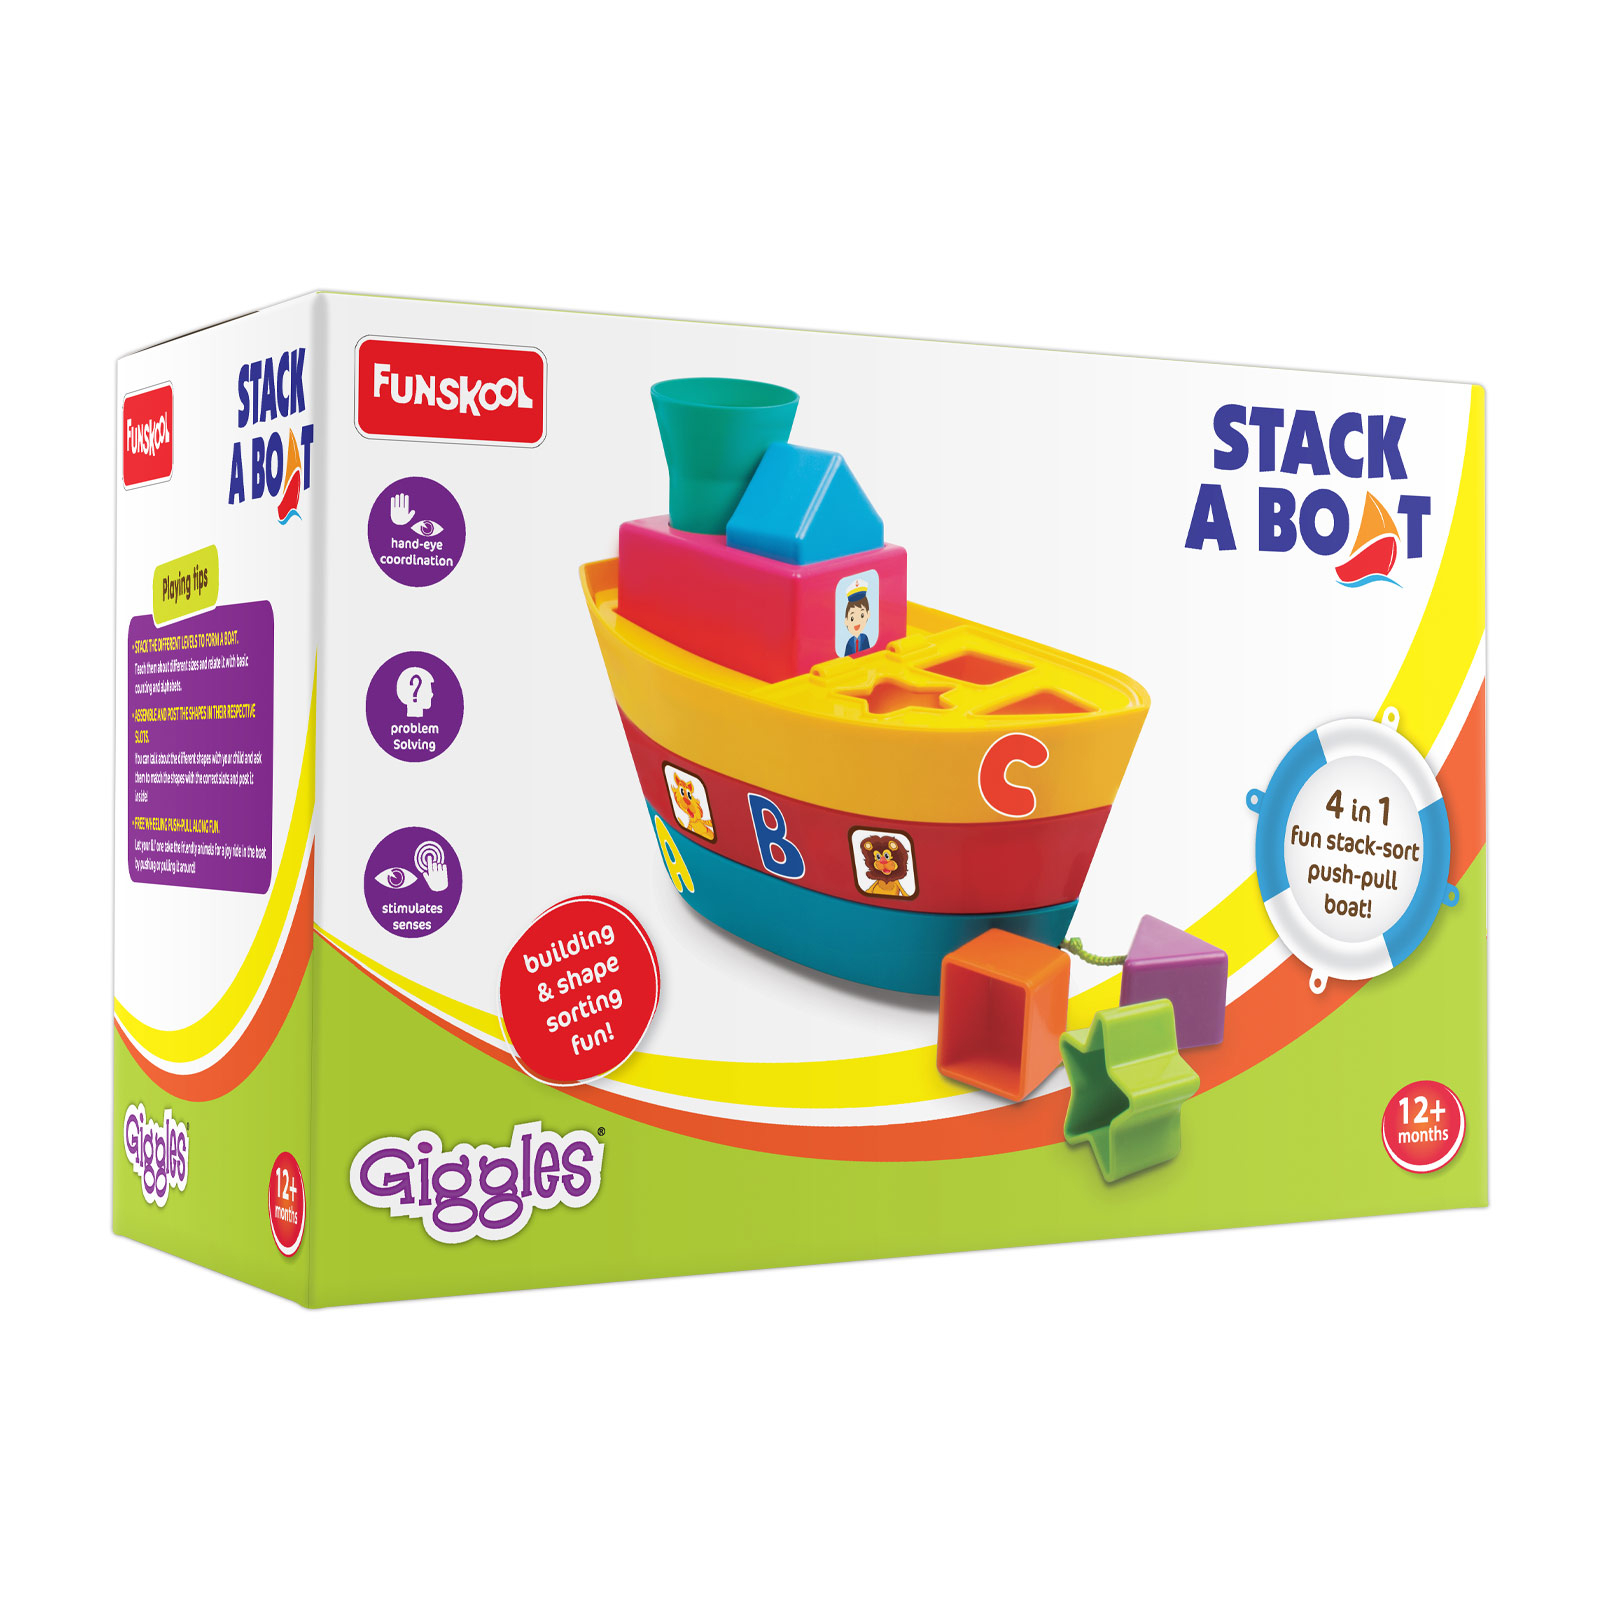 Funskool-Clipo Senior (64 Pcs) - Senior (64 Pcs) . Buy Blocks toys in  India. shop for Funskool-Clipo products in India. Toys for 3 - 18 Years  Kids.